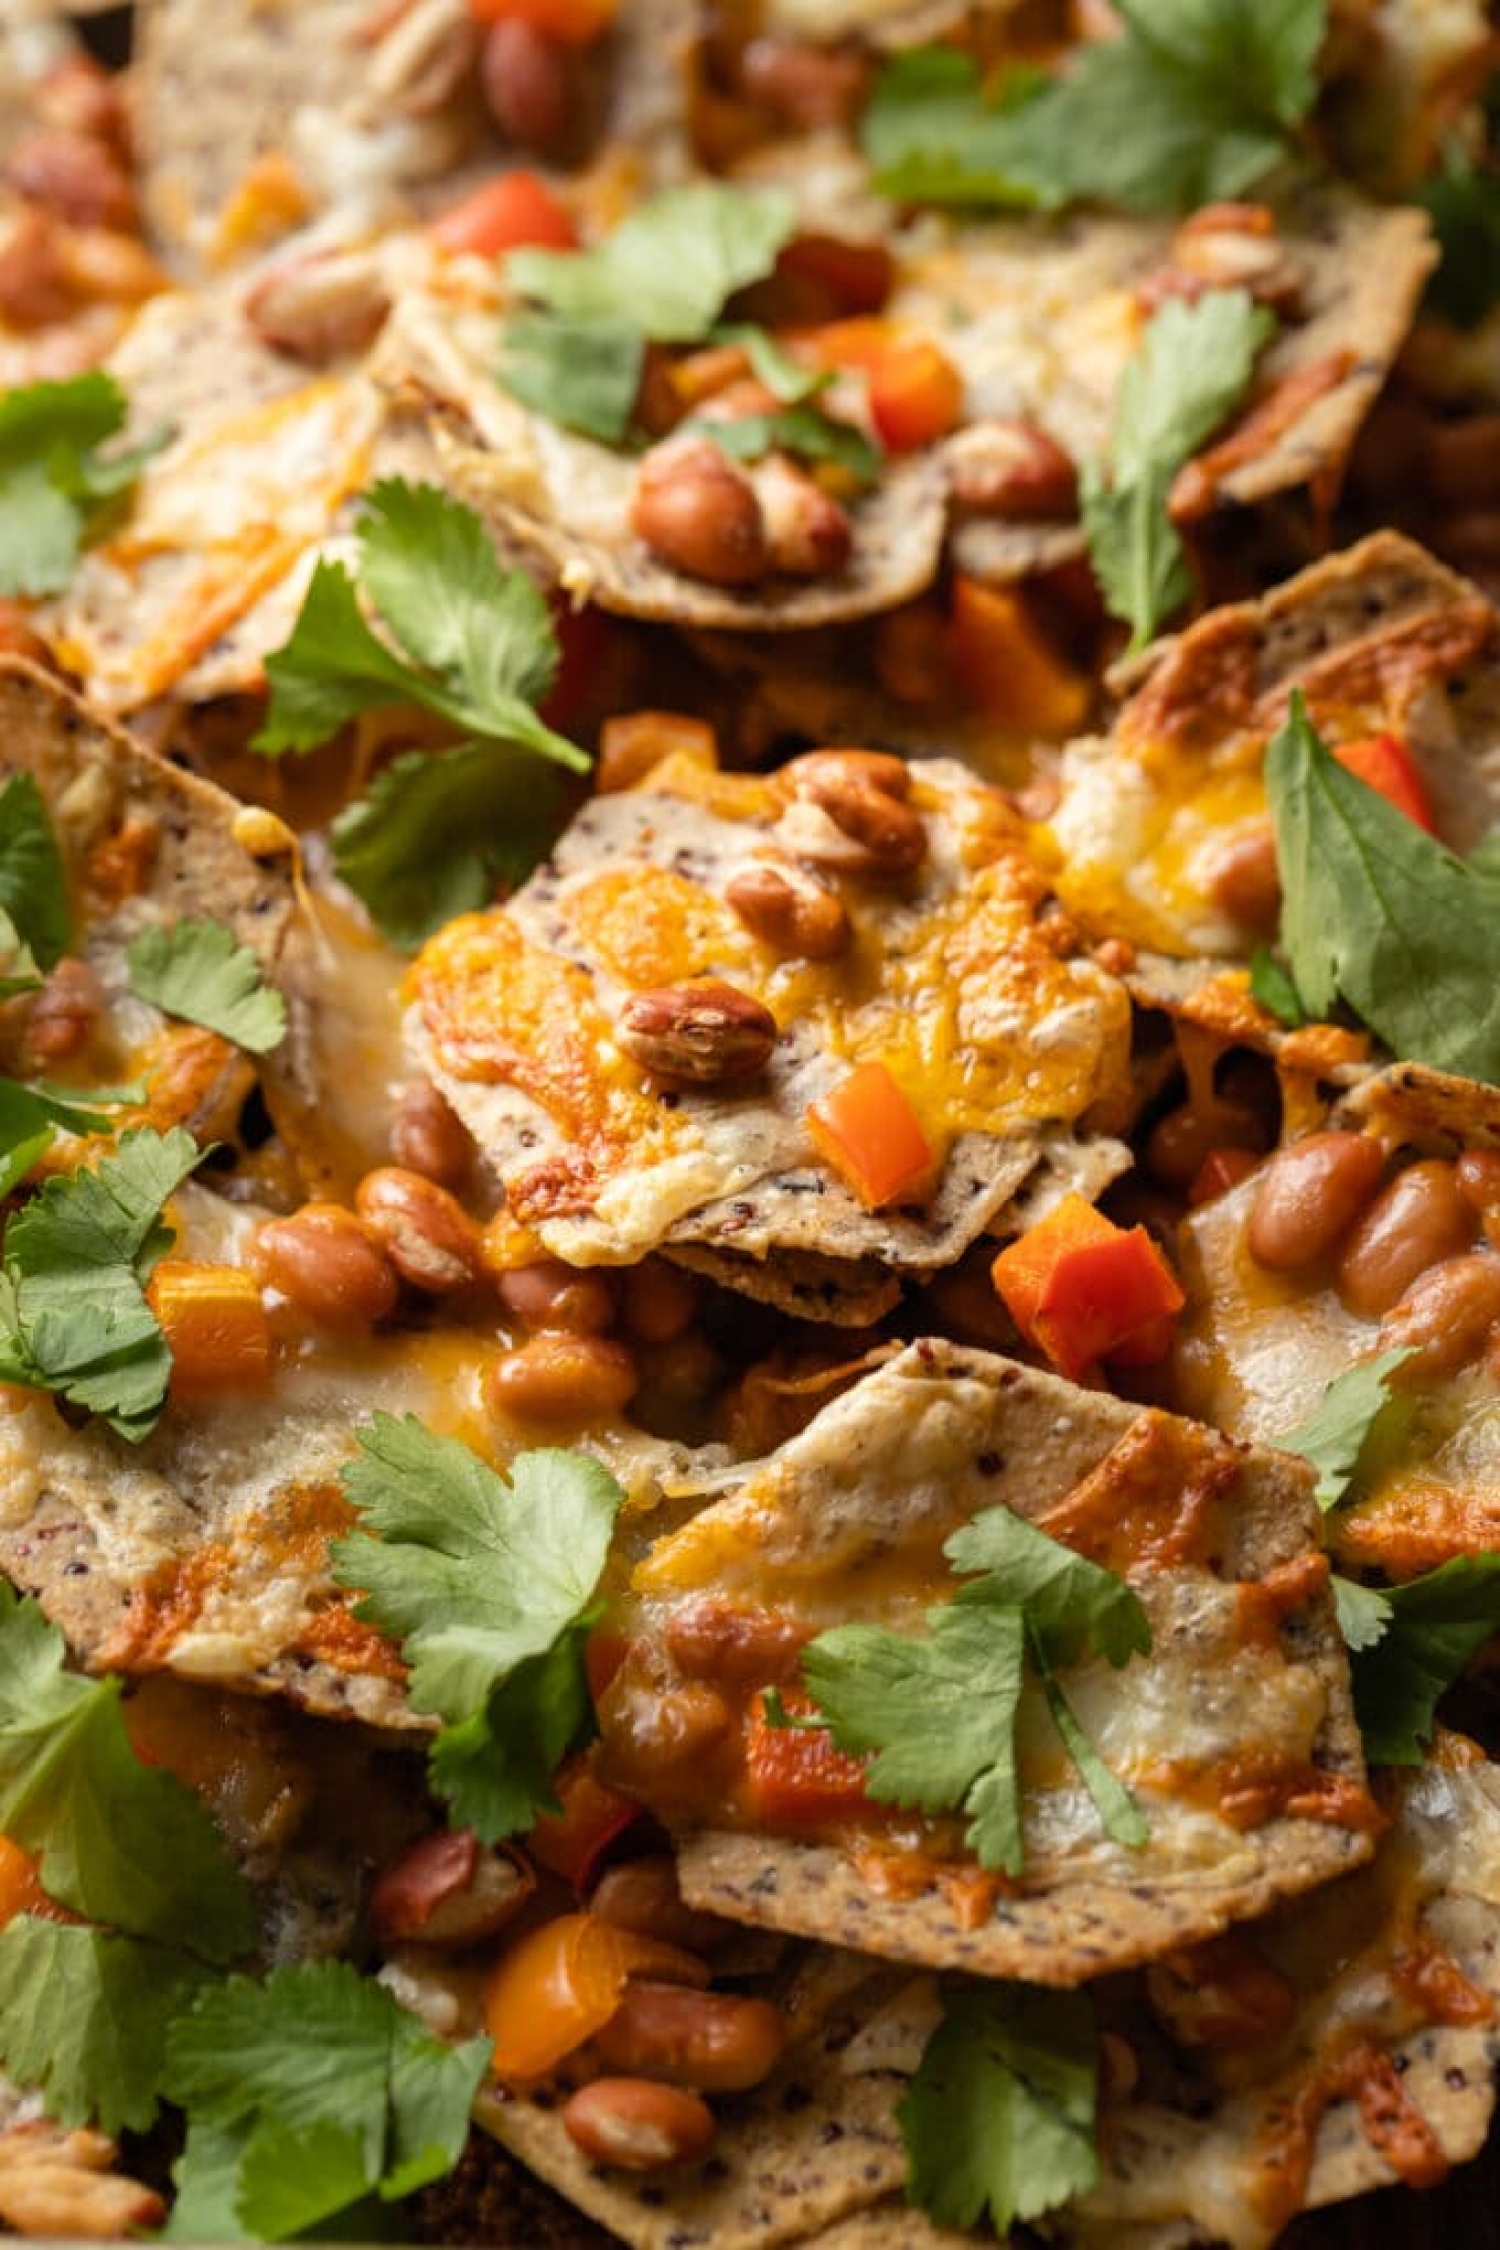 <p>Creamy pinto beans provide the protein in <a href="https://www.nourish-and-fete.com/pinto-bean-nachos/" rel="noopener">this ultra-simple recipe</a> for vegetarian nachos. With just 5 extra ingredients, plus whatever toppings you prefer, it's a great snack for game day or any time you don't really feel like cooking.</p>